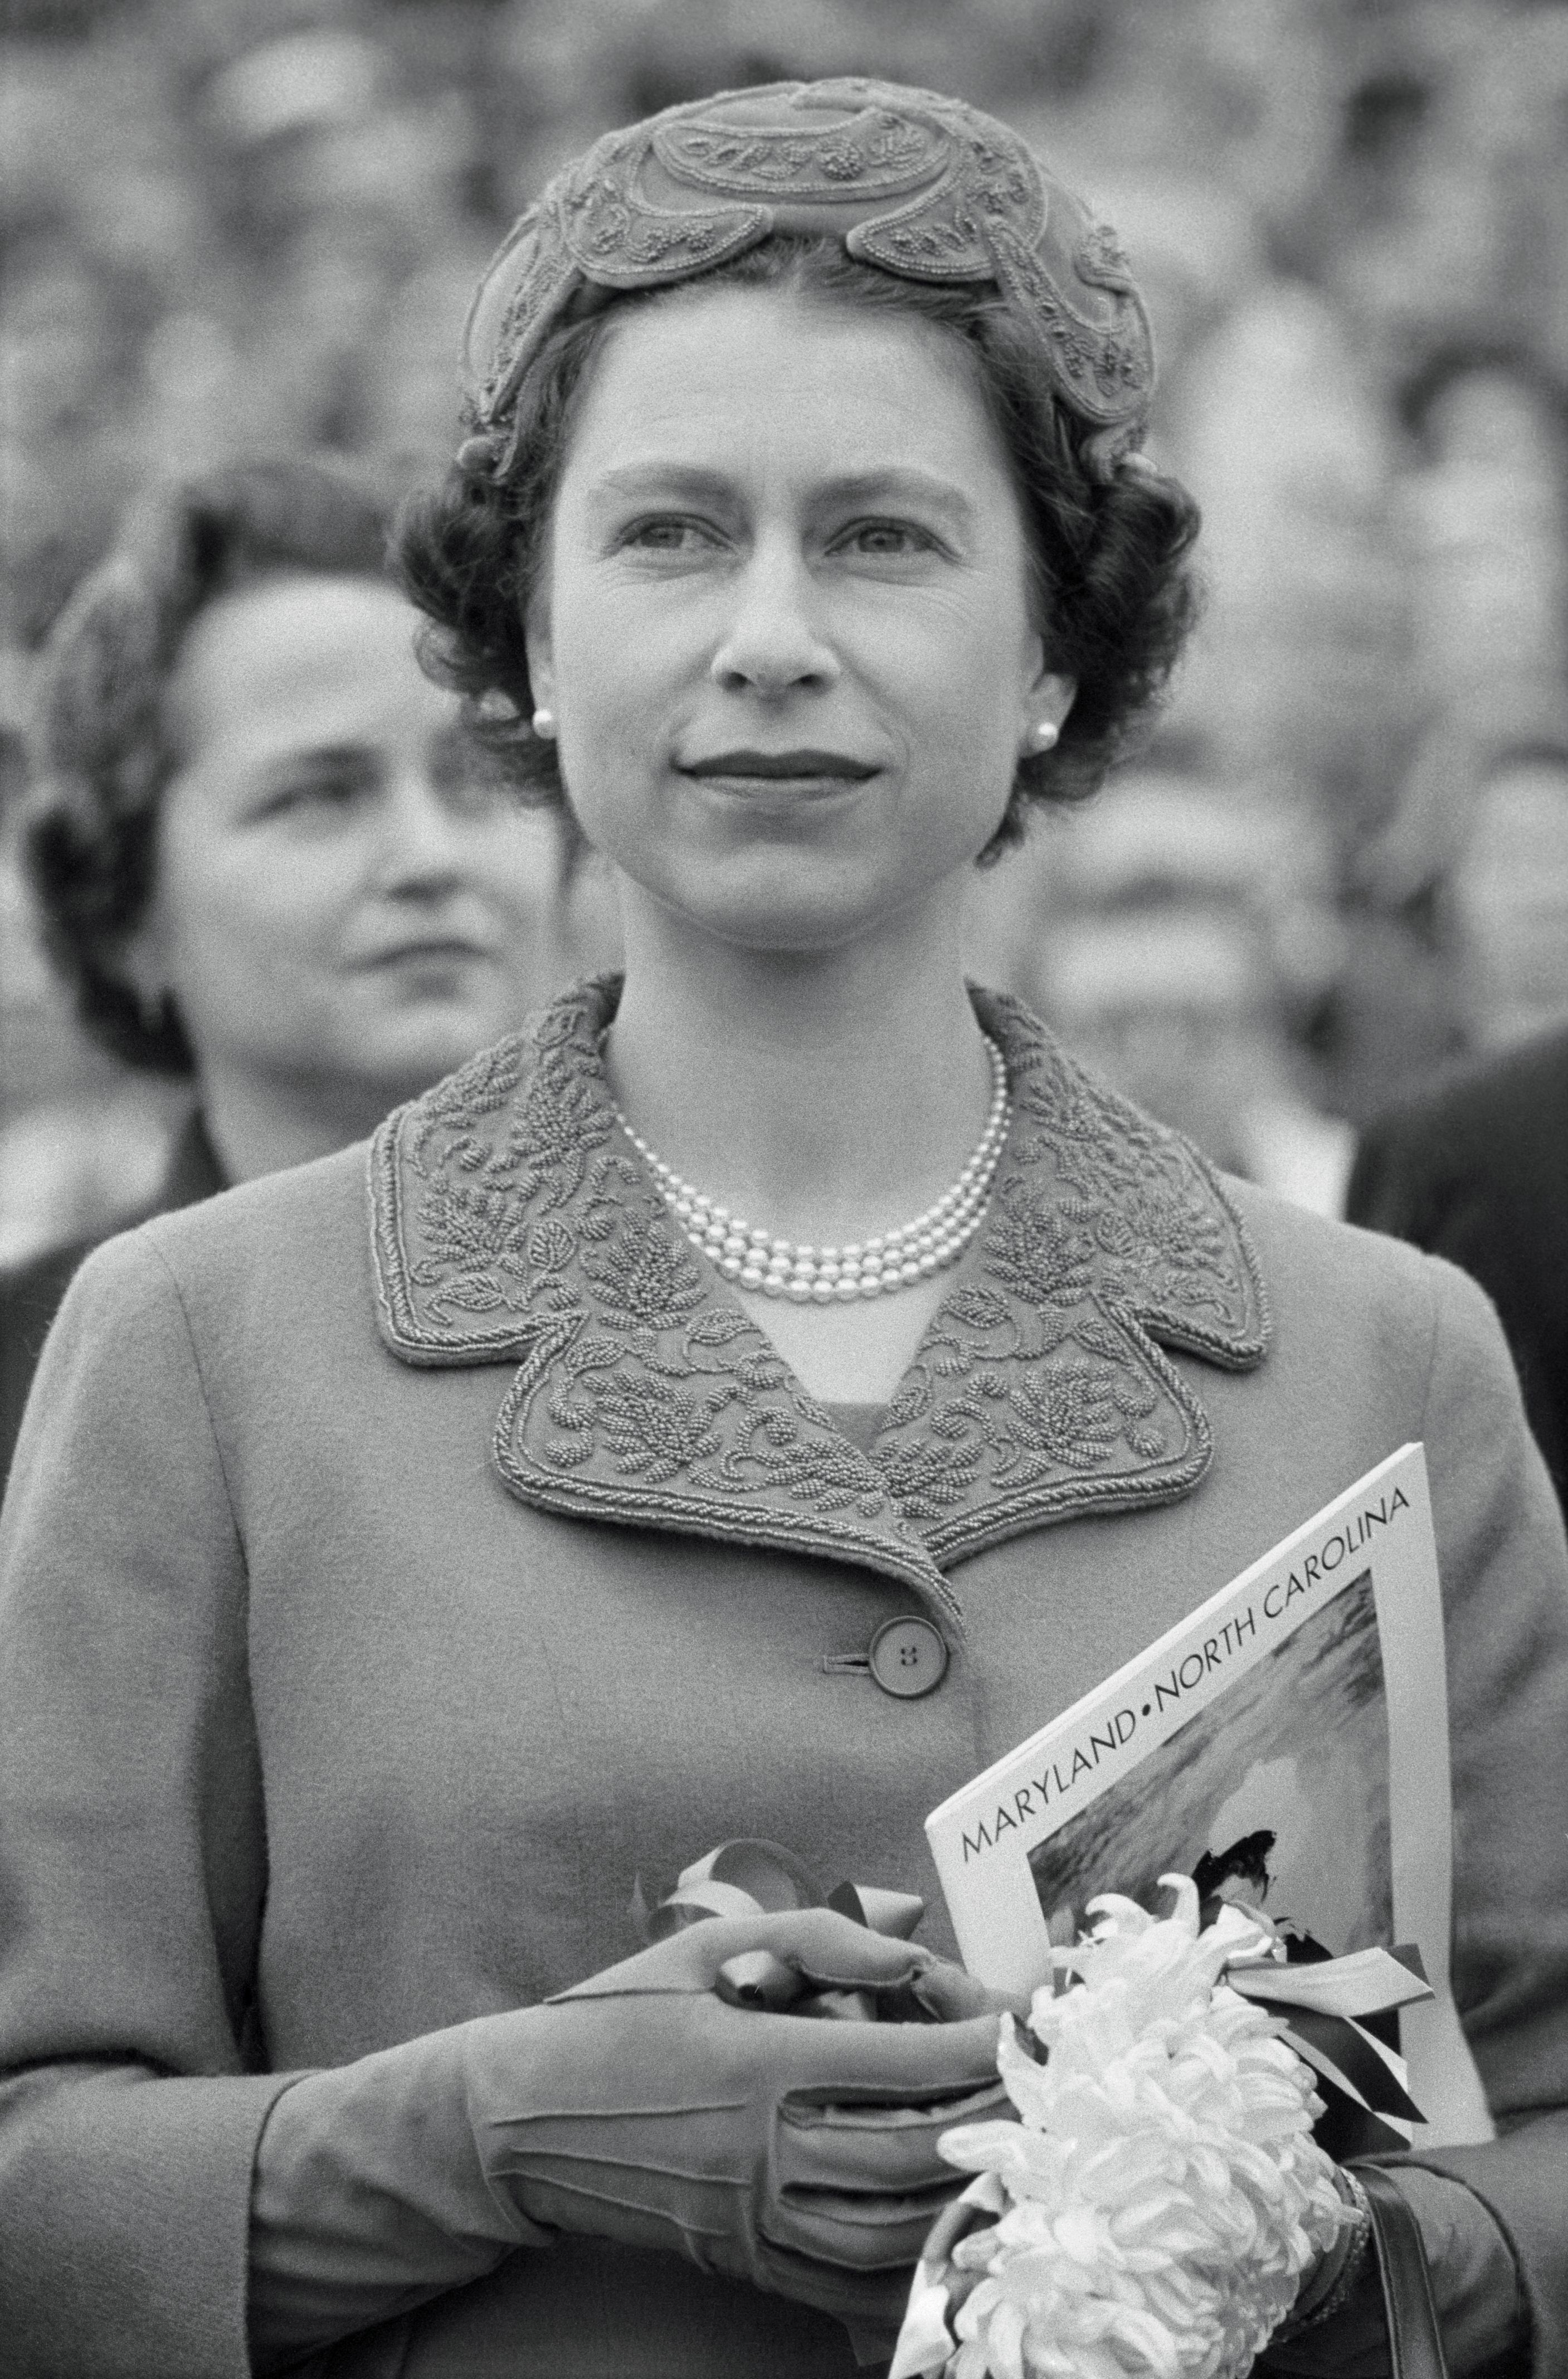 The queen holding a program for the North Carolina v. Maryland game in 1957. 